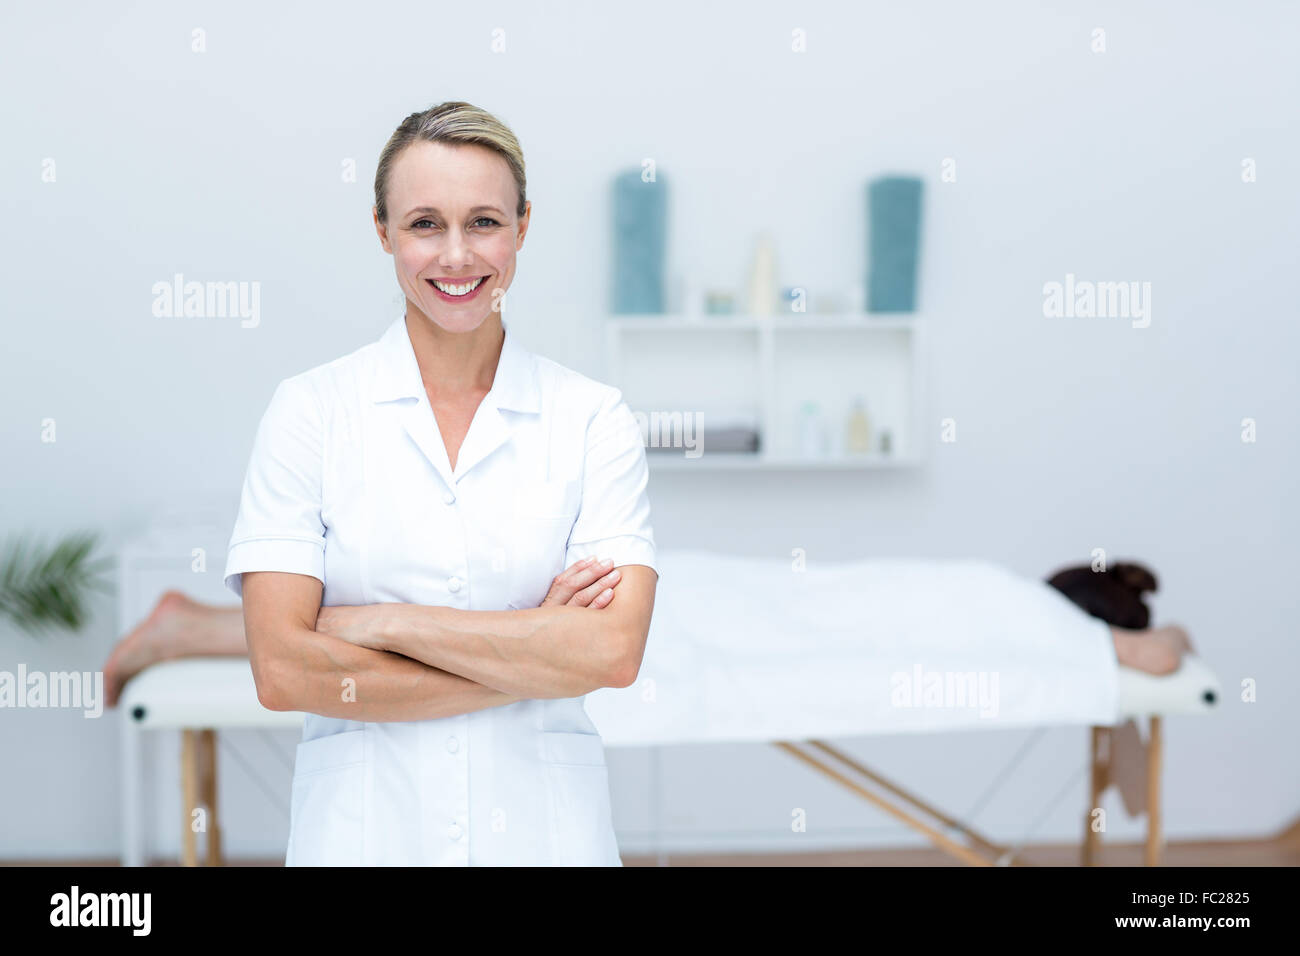 Physiotherapist smiling at camera arms crossed Stock Photo